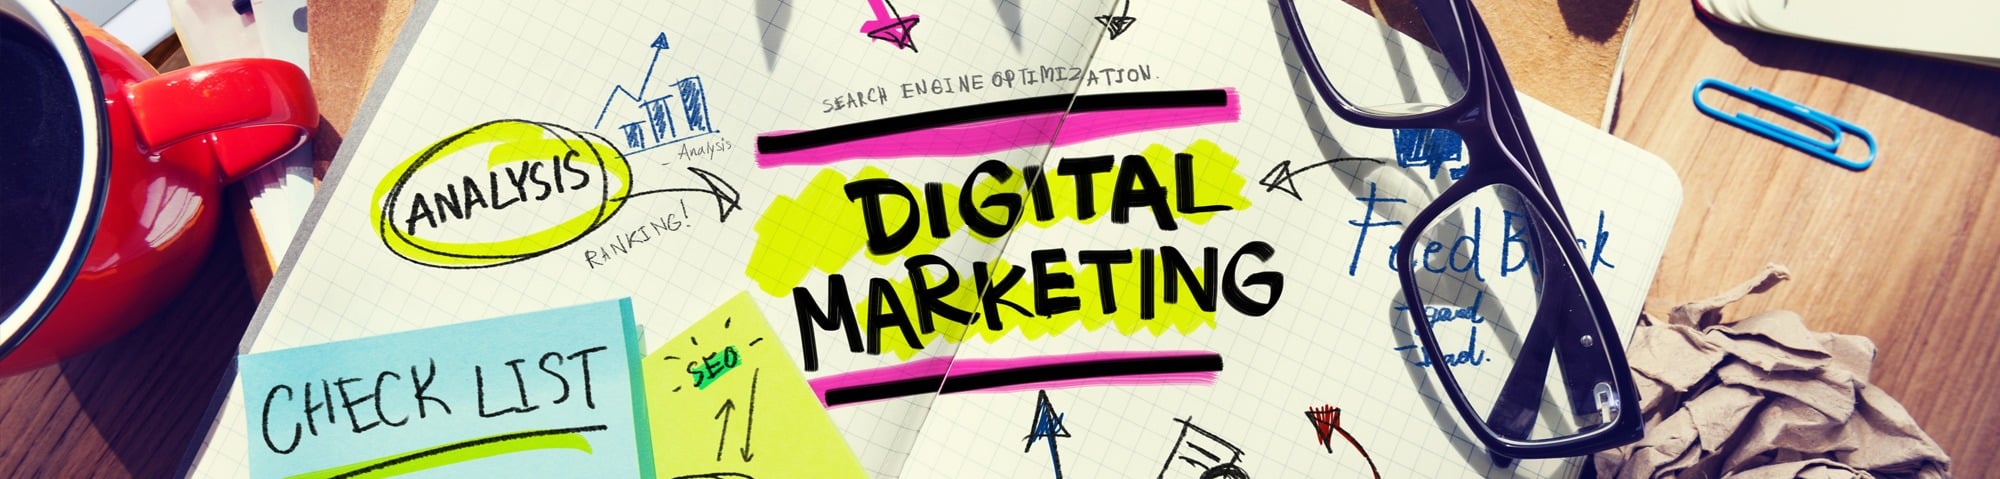 The Guide to Digital Marketing for Manufacturers